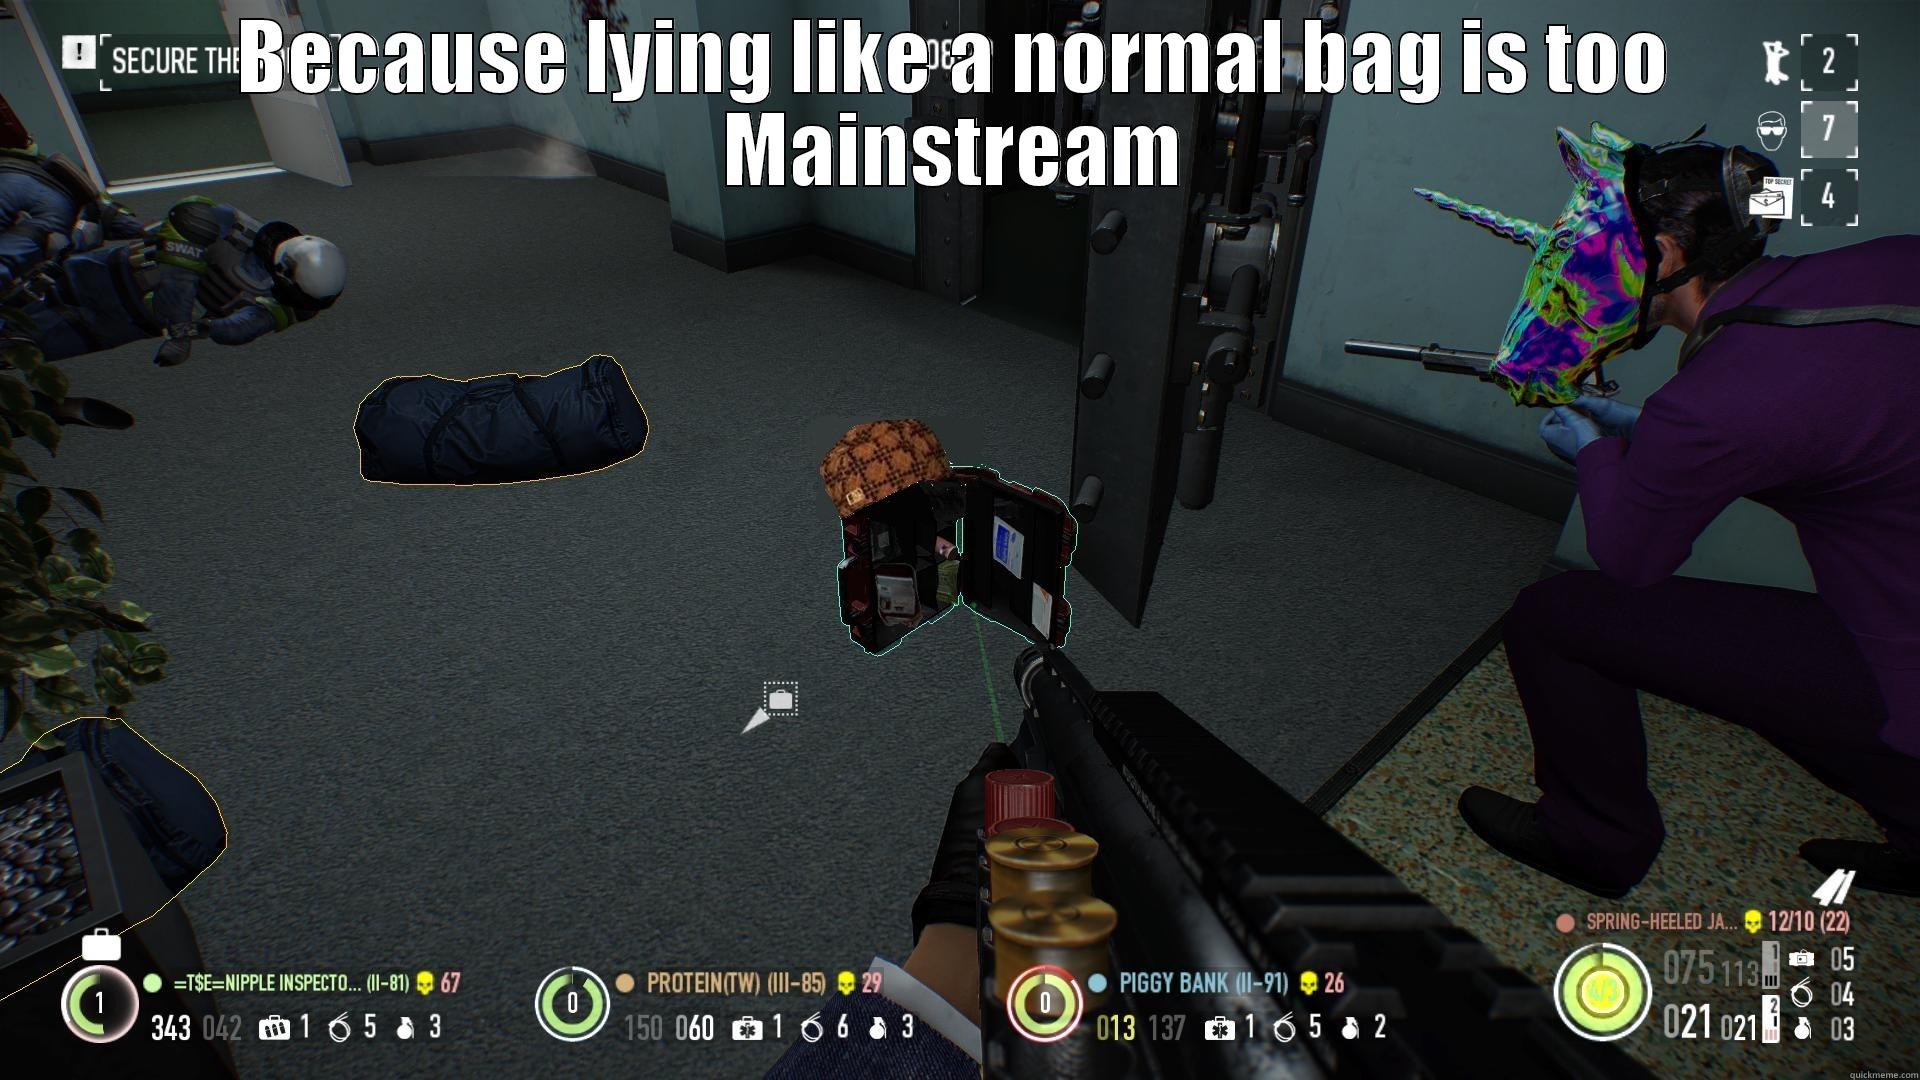 BECAUSE LYING LIKE A NORMAL BAG IS TOO MAINSTREAM  Misc